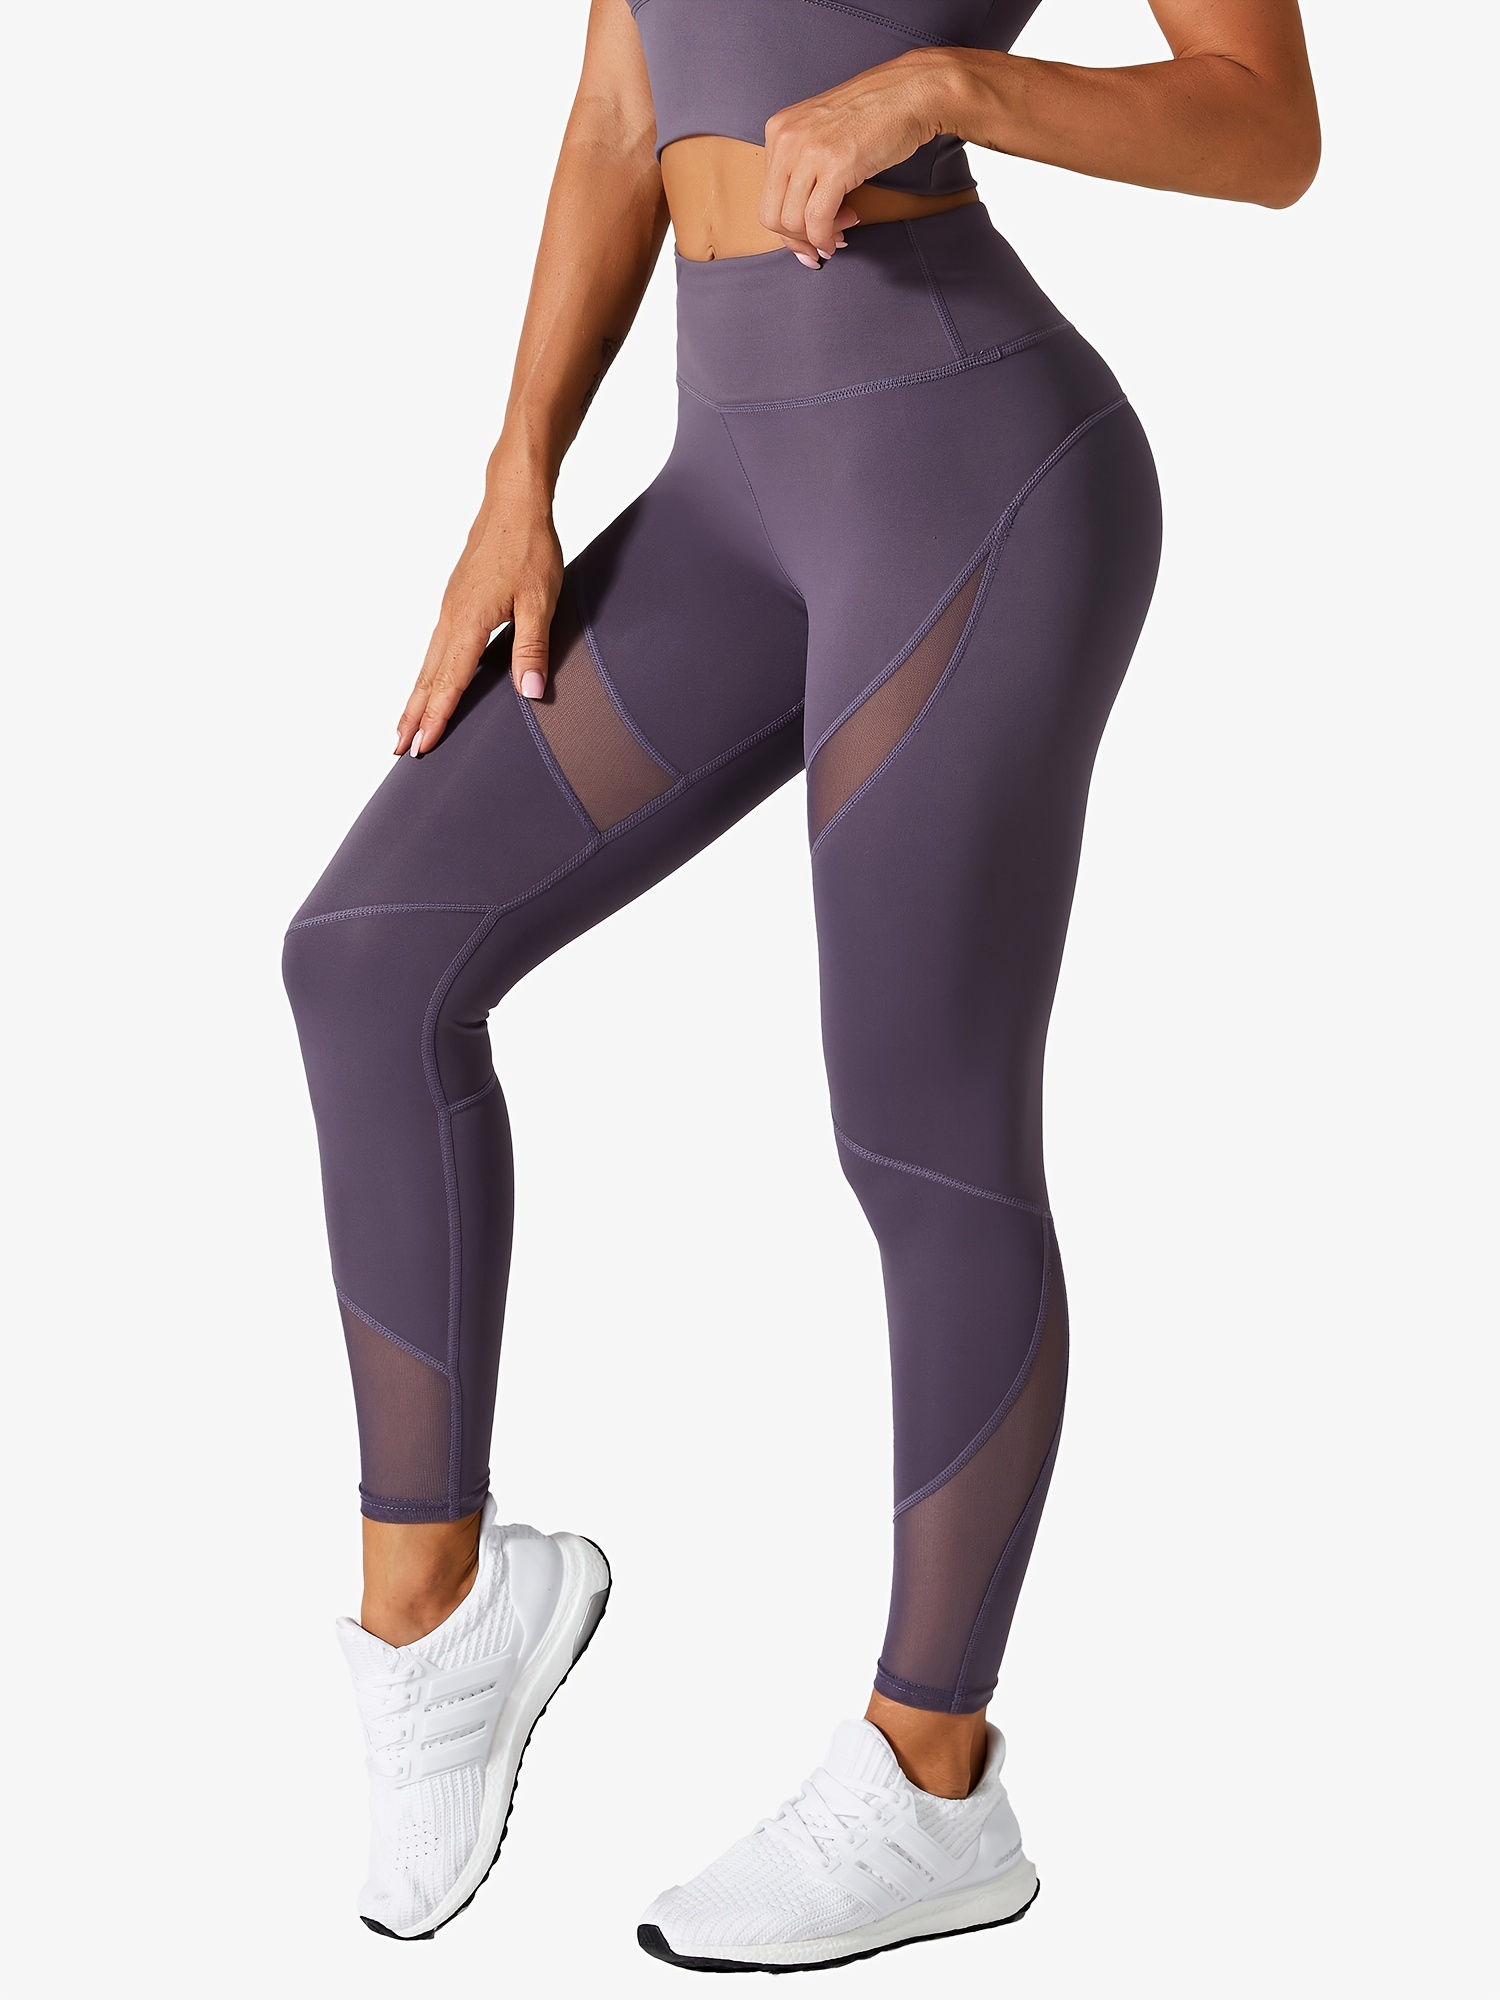 Stretch Fit Yoga Pants for Women's & Tights for Women Workout with Mesh  Insert & Side Pockets at Rs 249 in Surat